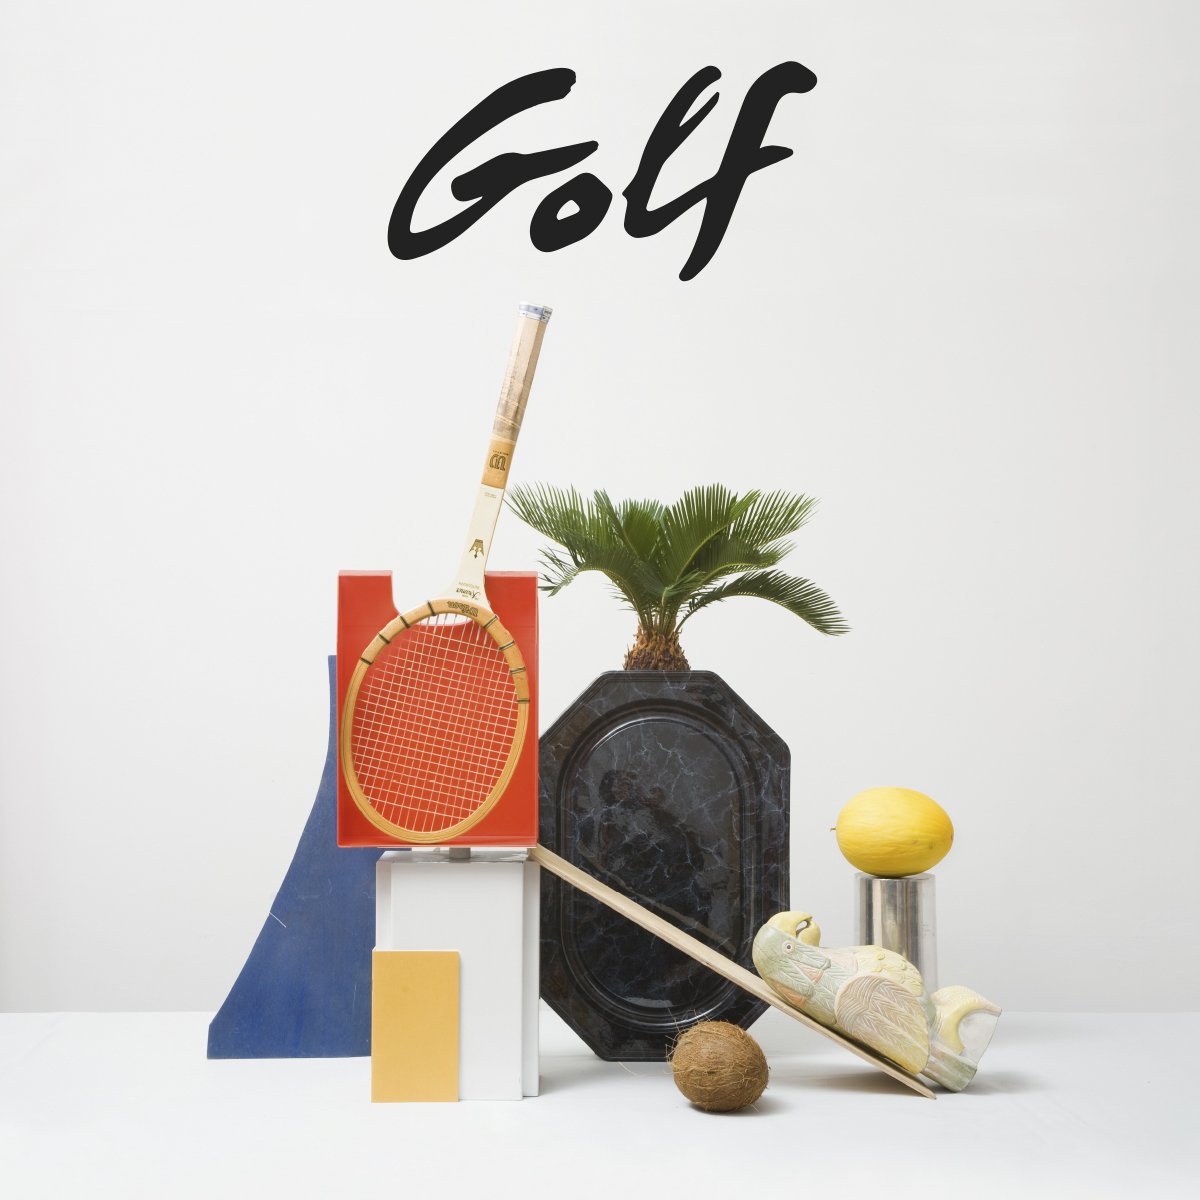 Golf - Ping Pong Cover